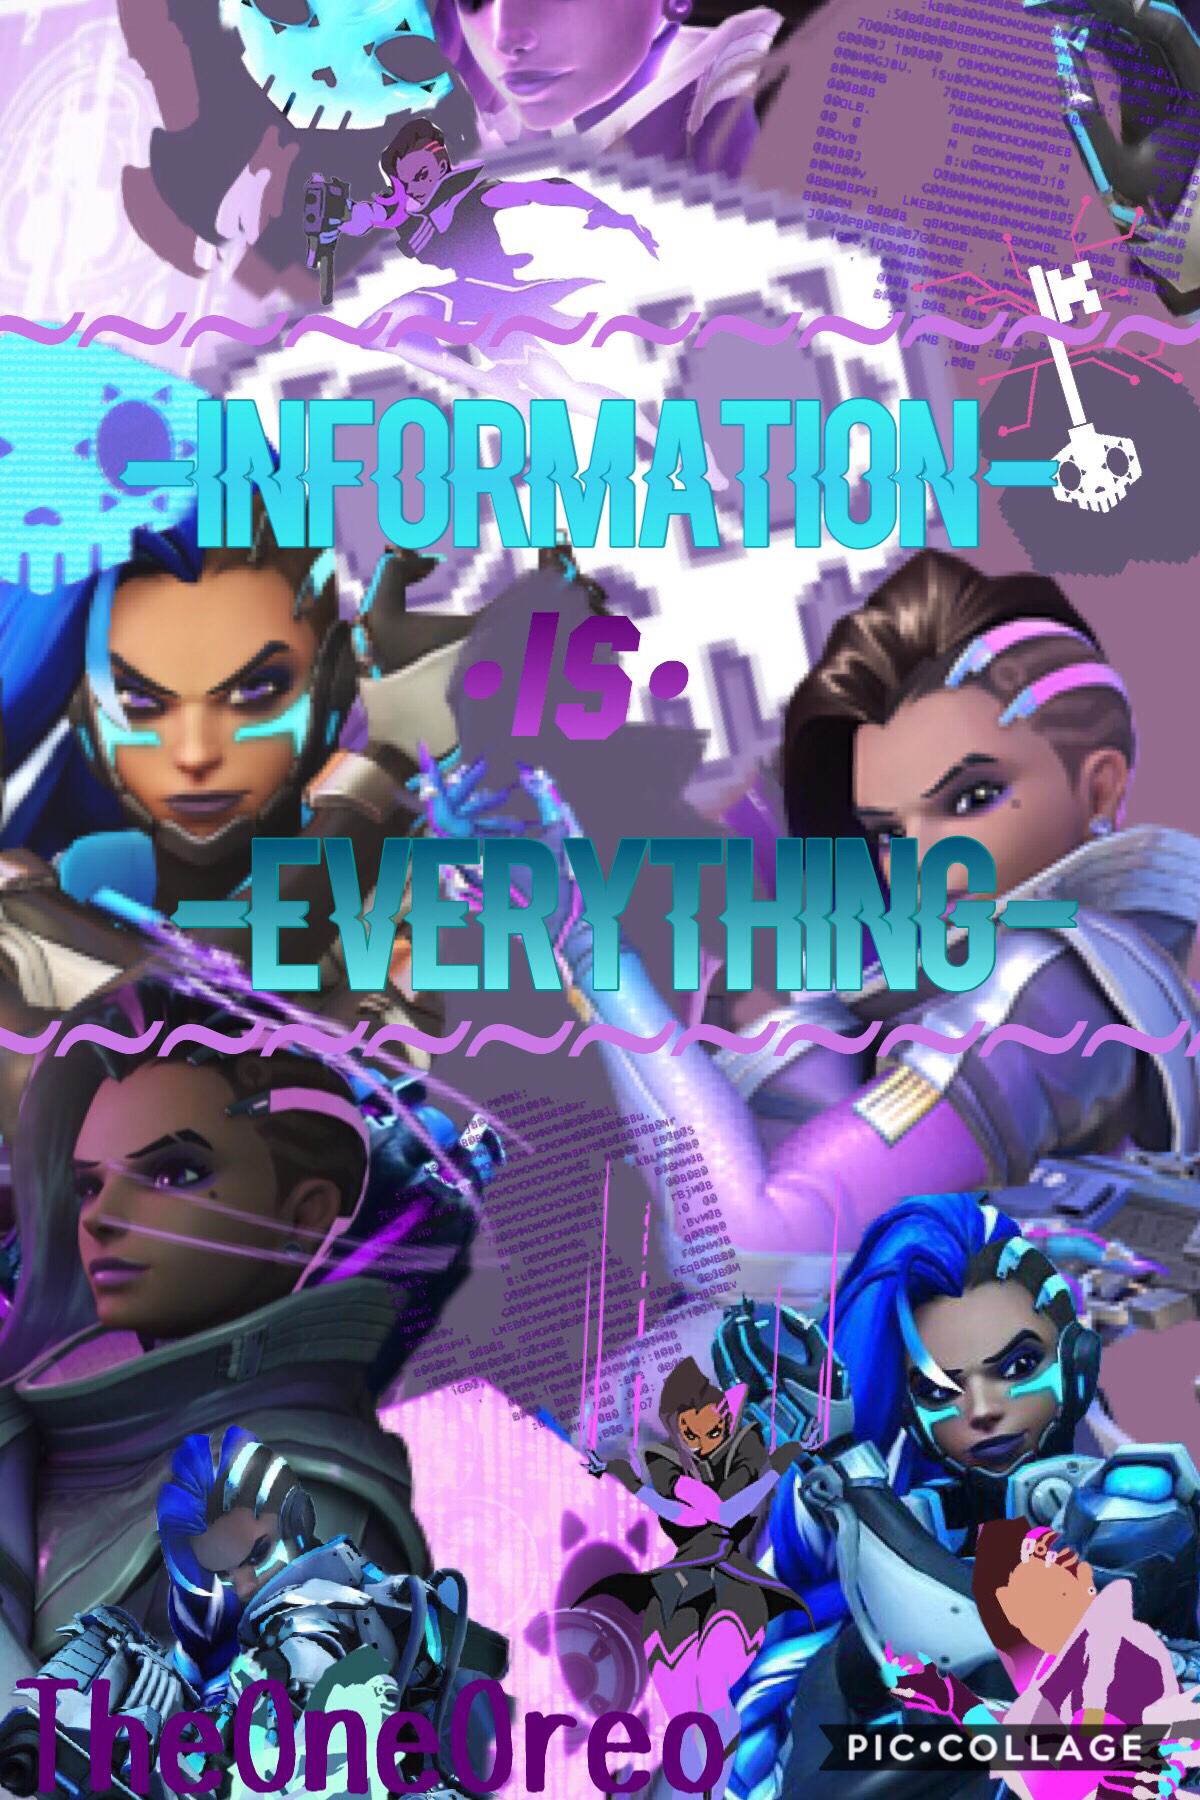 👾Sombra👾 (TAP💖)

        This turned out 
  pretty badly but I had 
         nothing left to 
                 post.
What do you guys think?
👾👾👾👾👾👾👾👾👾